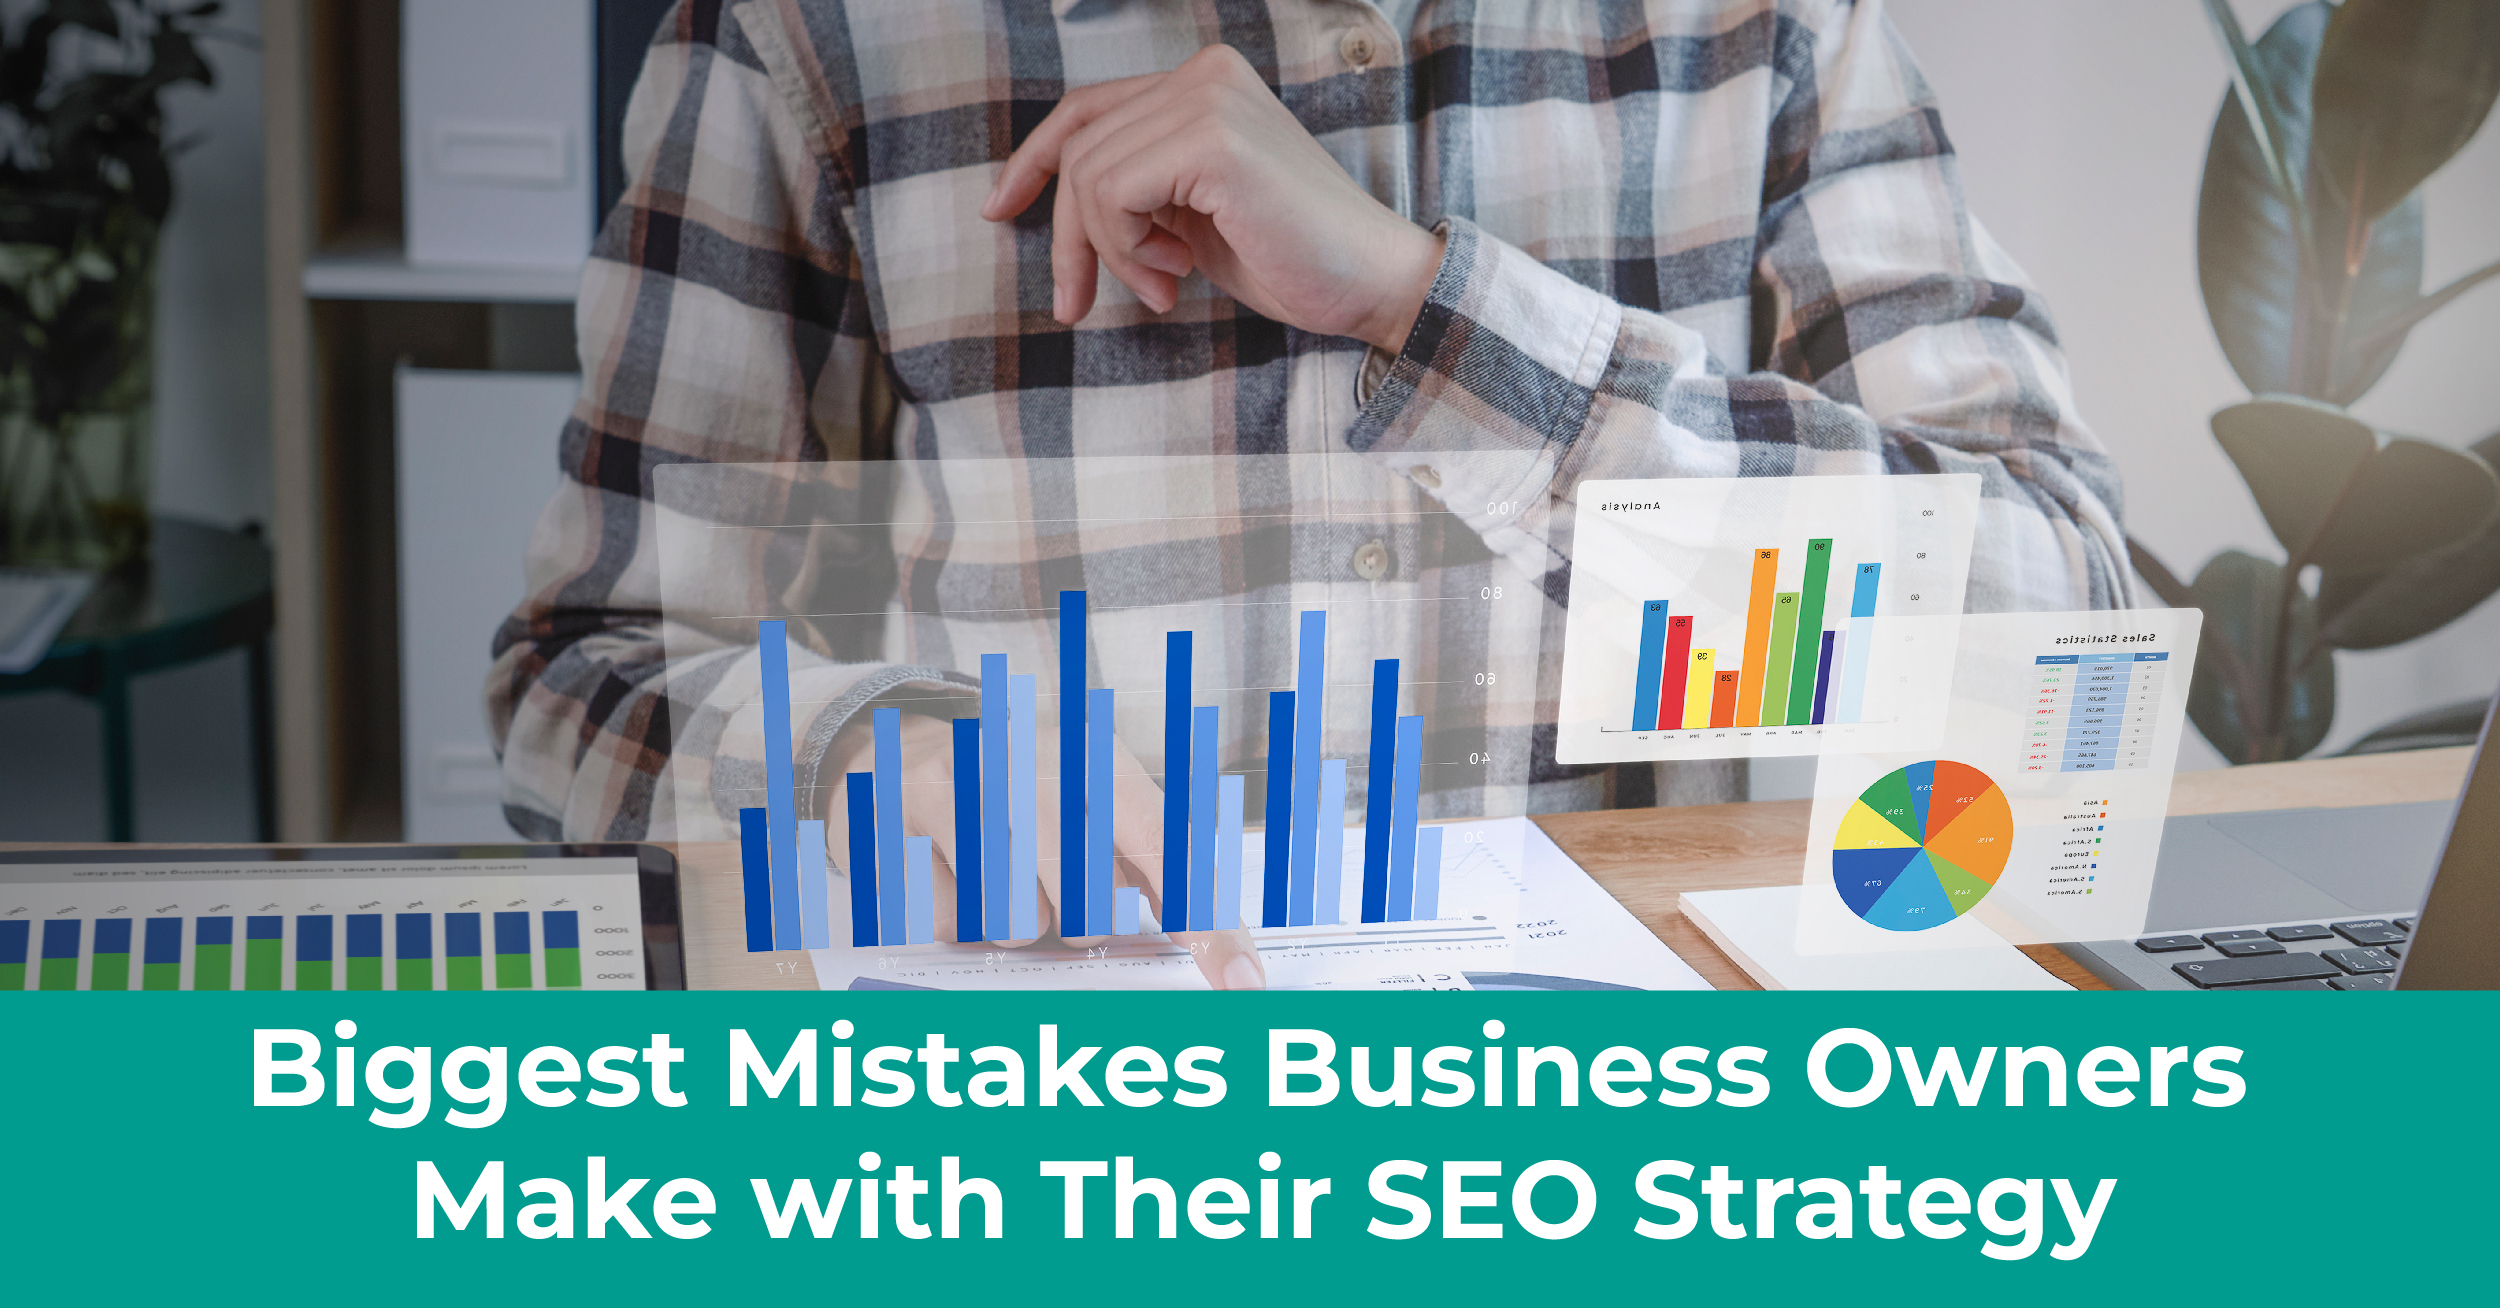 Biggest Mistakes Business Owners Make With Their SEO Strategy